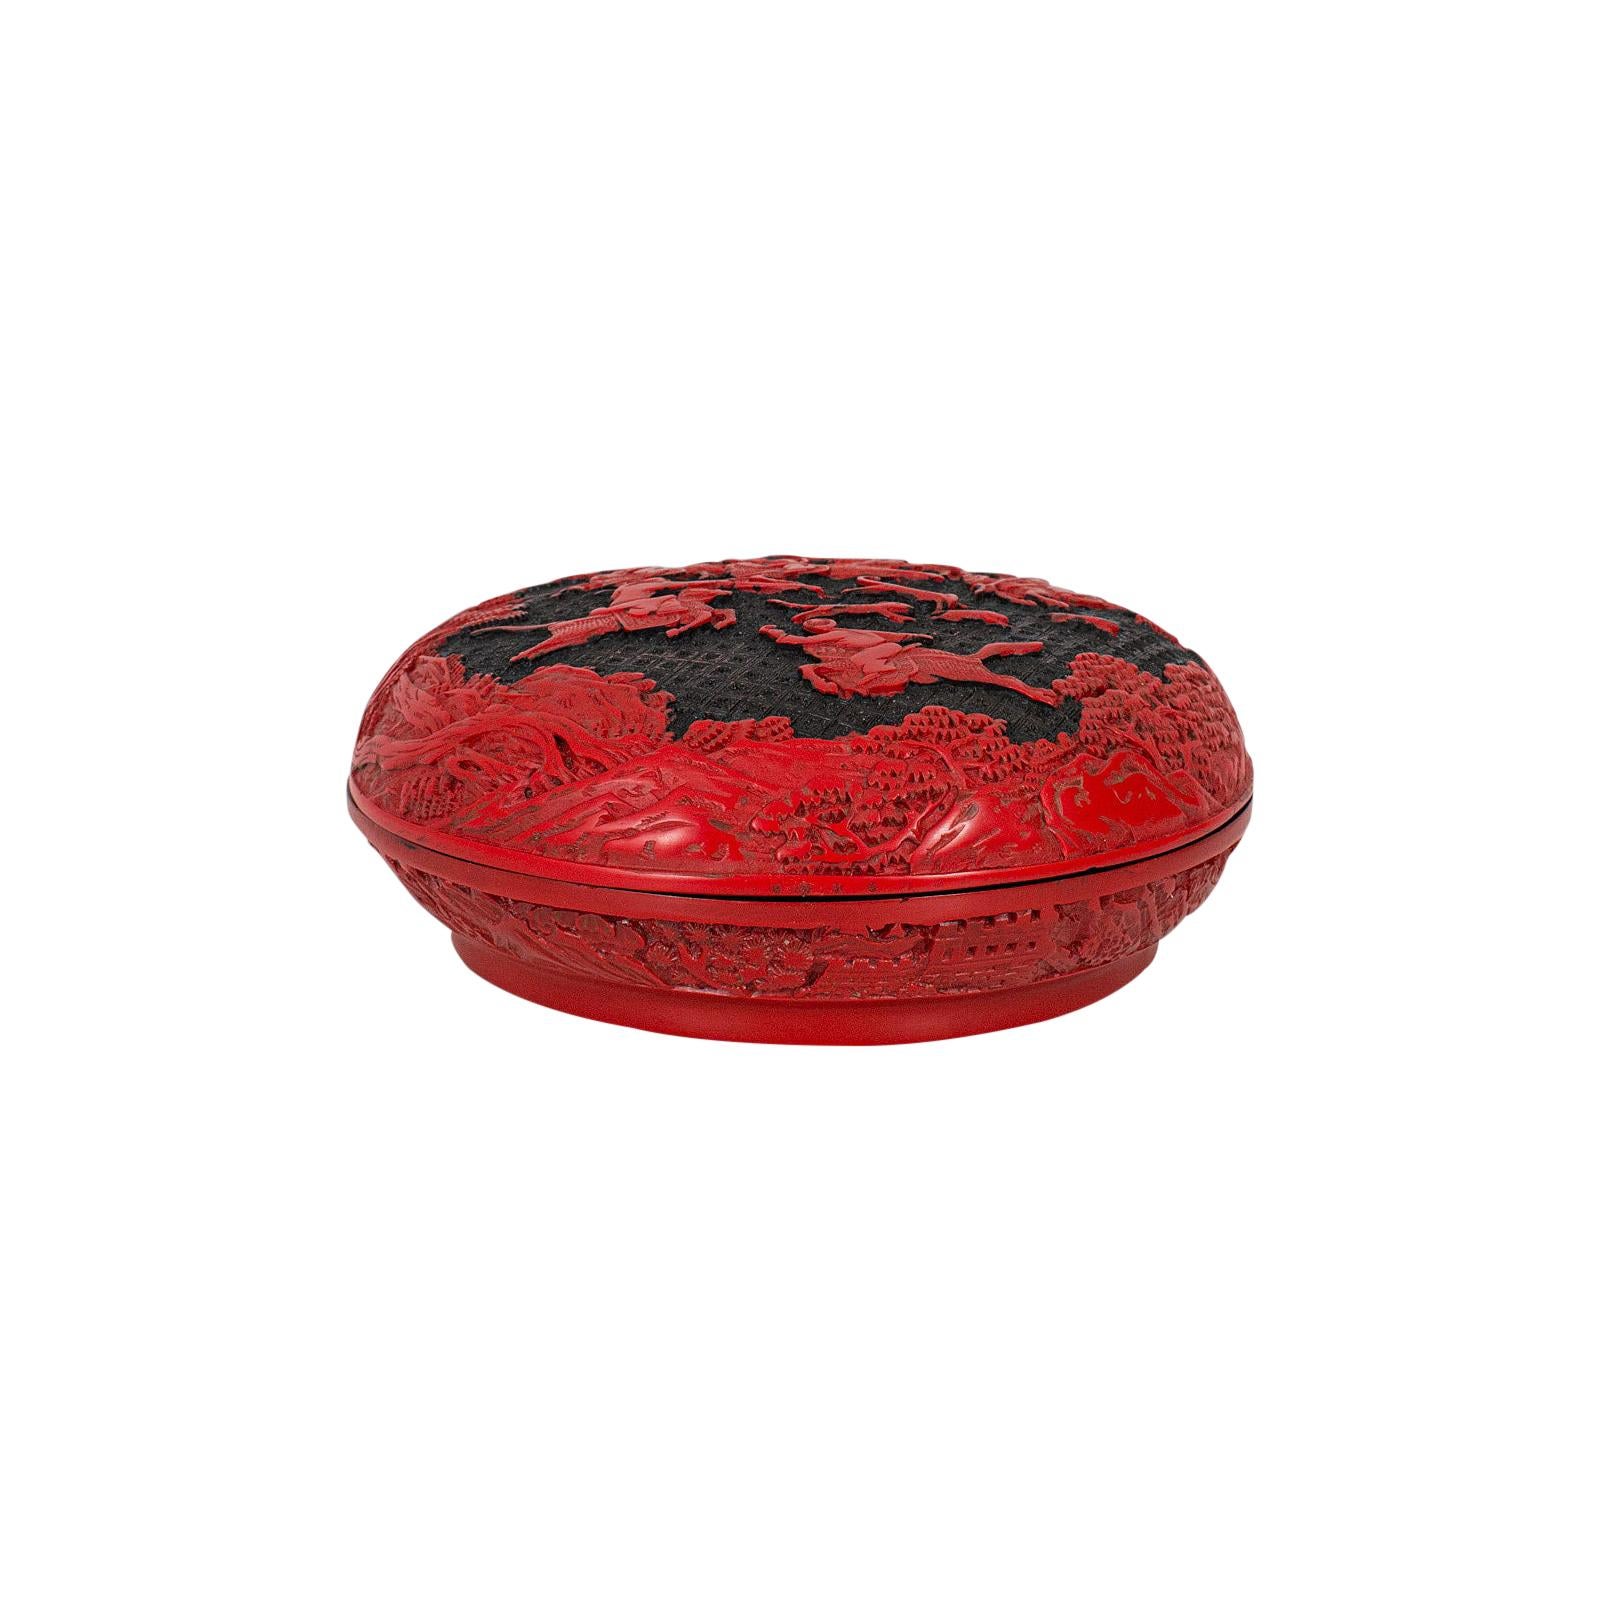 Antique Cinnabar Box, Chinese, Lacquer, Decorative Tray, Qing Dynasty circa 1900